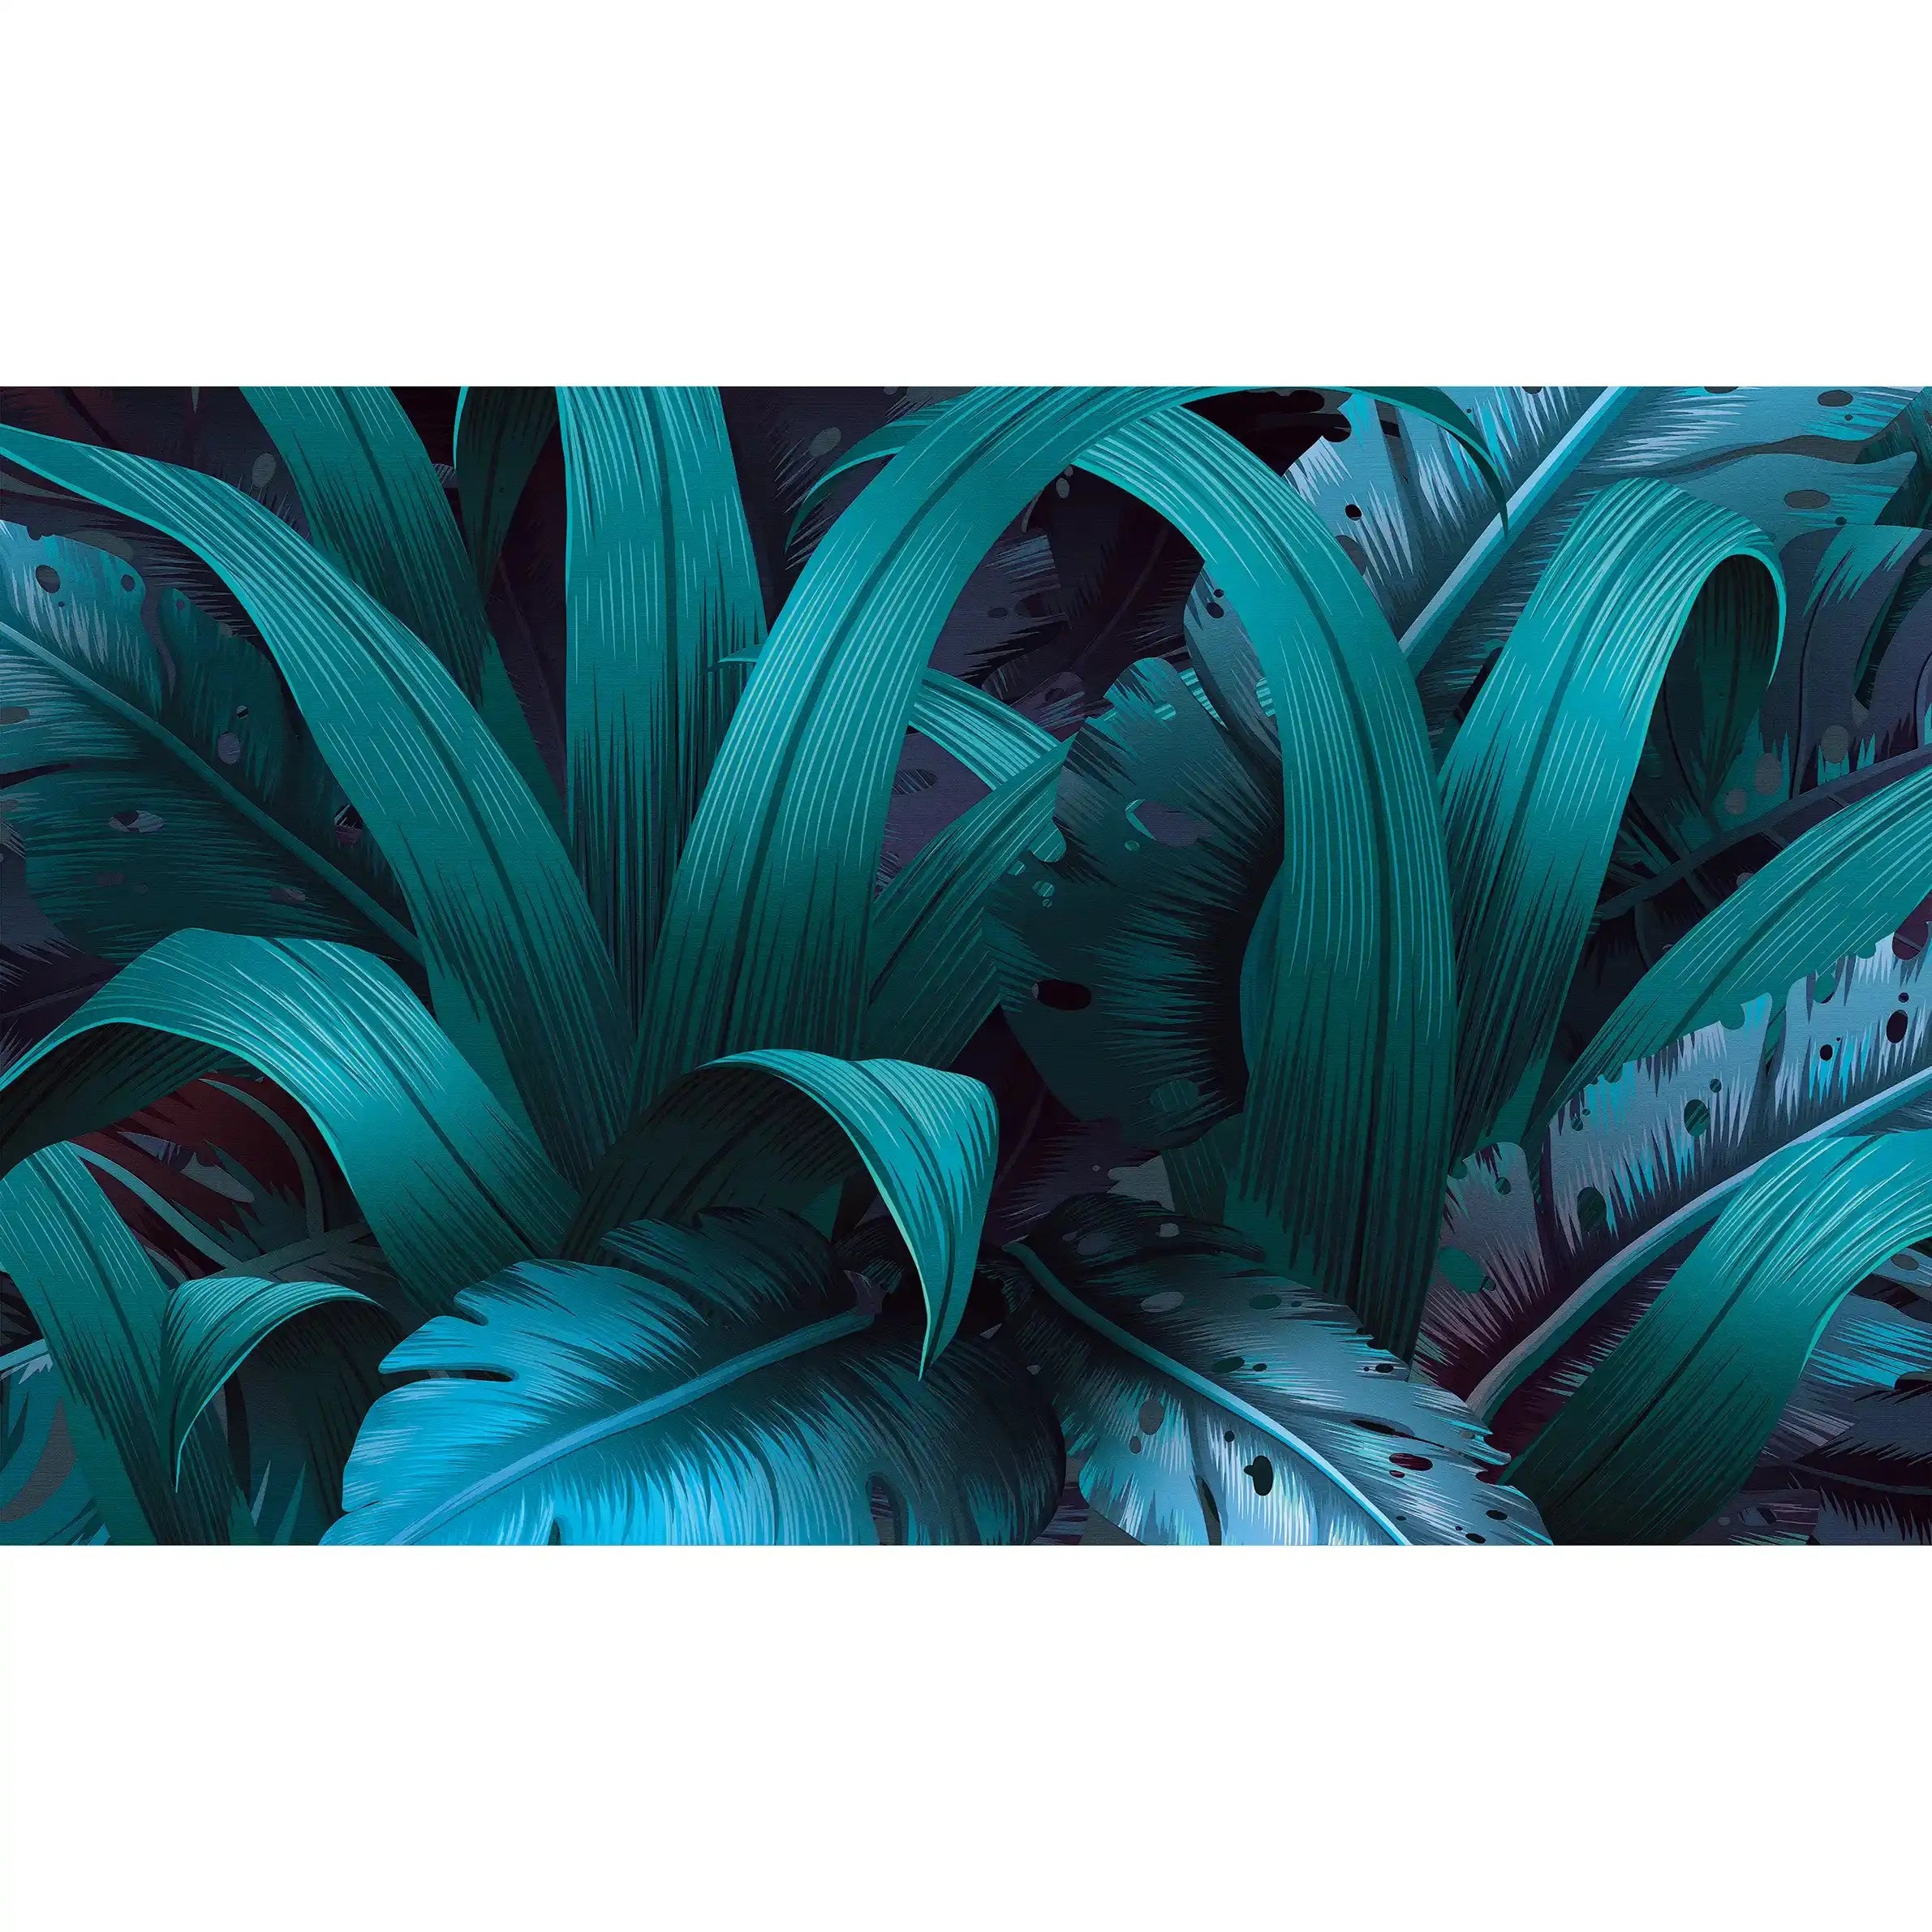 3049-C / Turquoise Jungle Peel and Stick Mural - Temporary Wallpaper, Tropical Rainforest, Easy Install Wallpaper for Wall Decor, DIY Decor, and Room Decor - Artevella